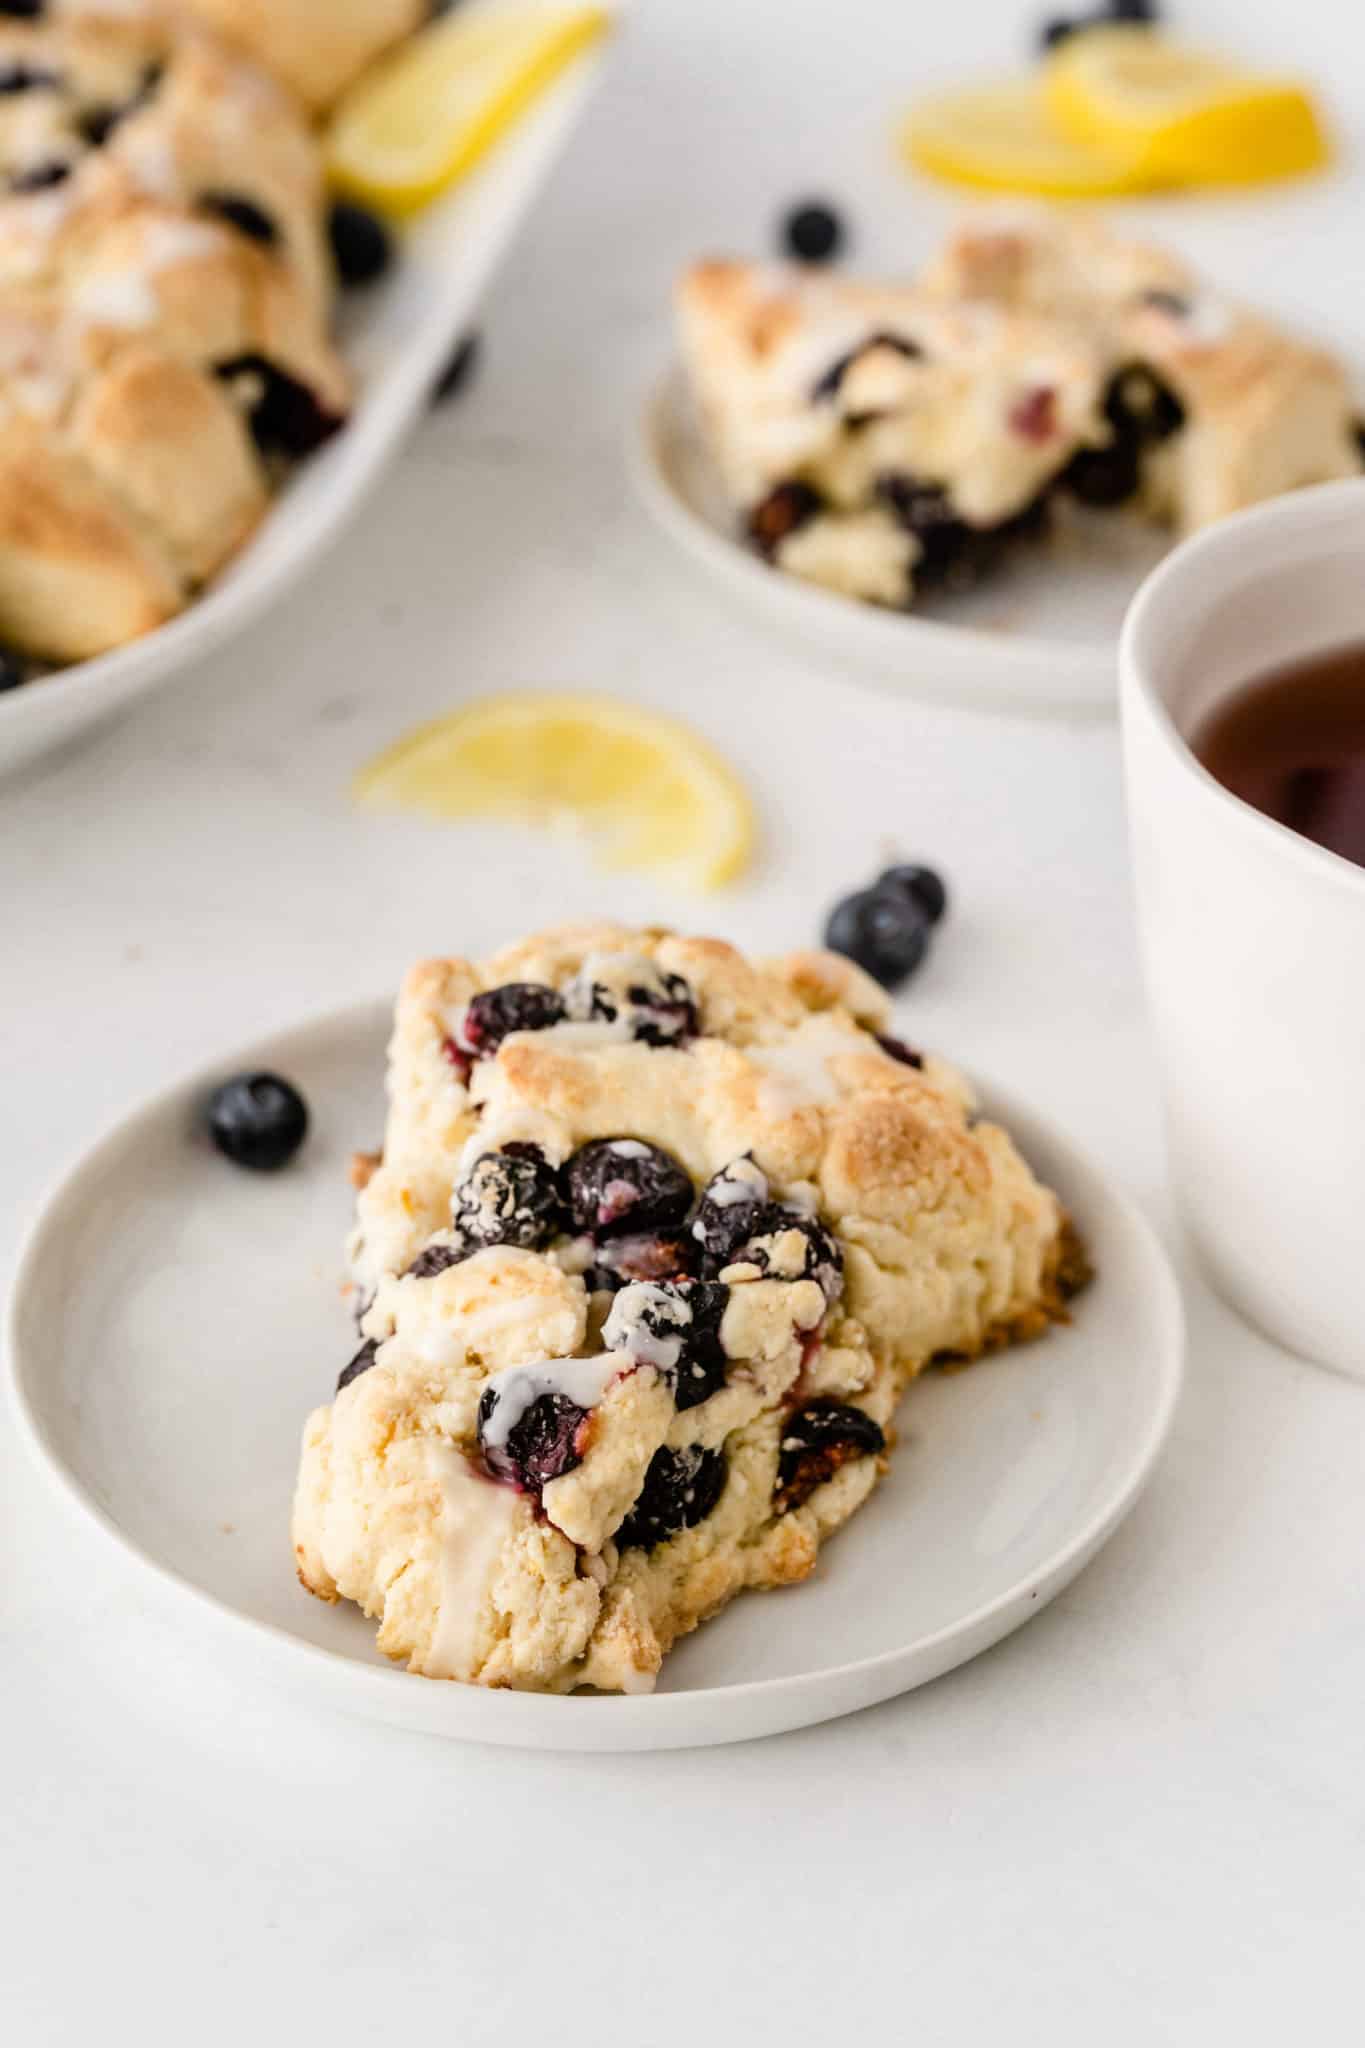 blueberry scone served on a plate with fresh blueberries and a cup of tea.